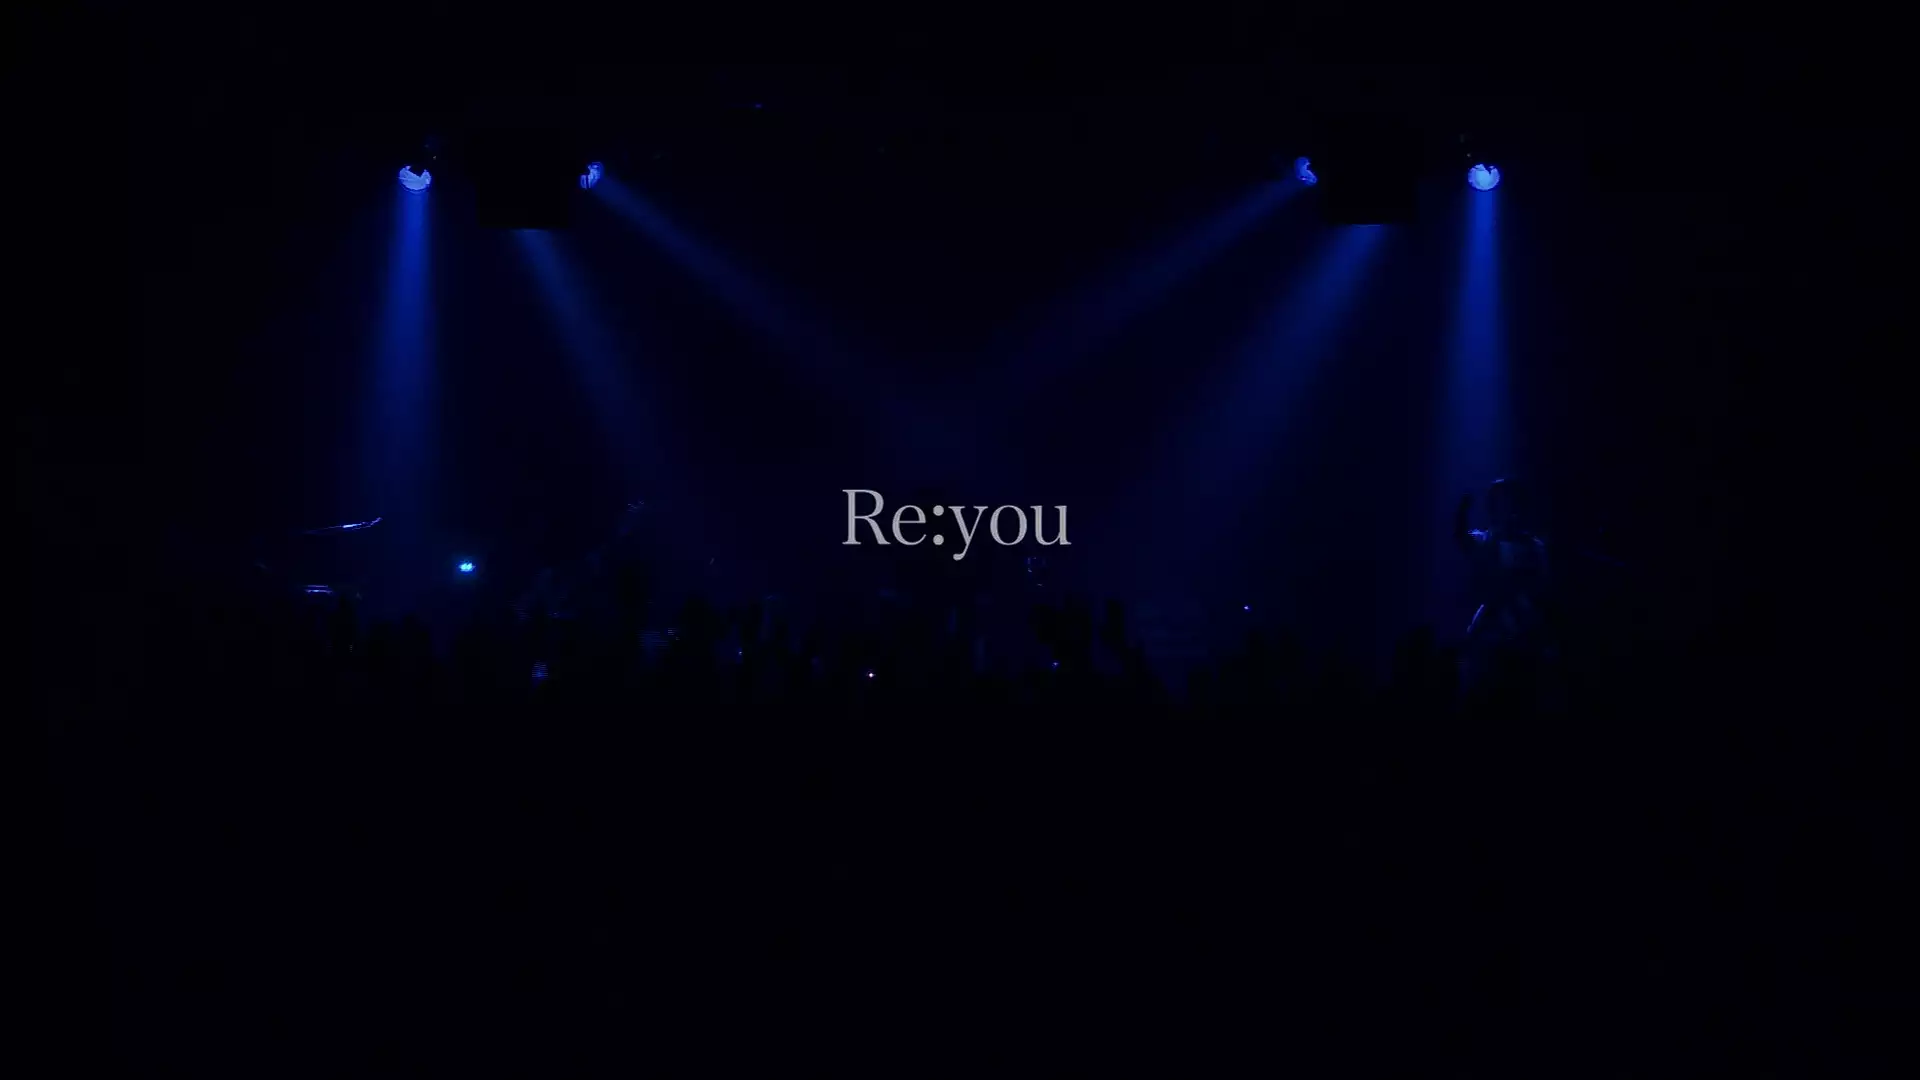 Re:you